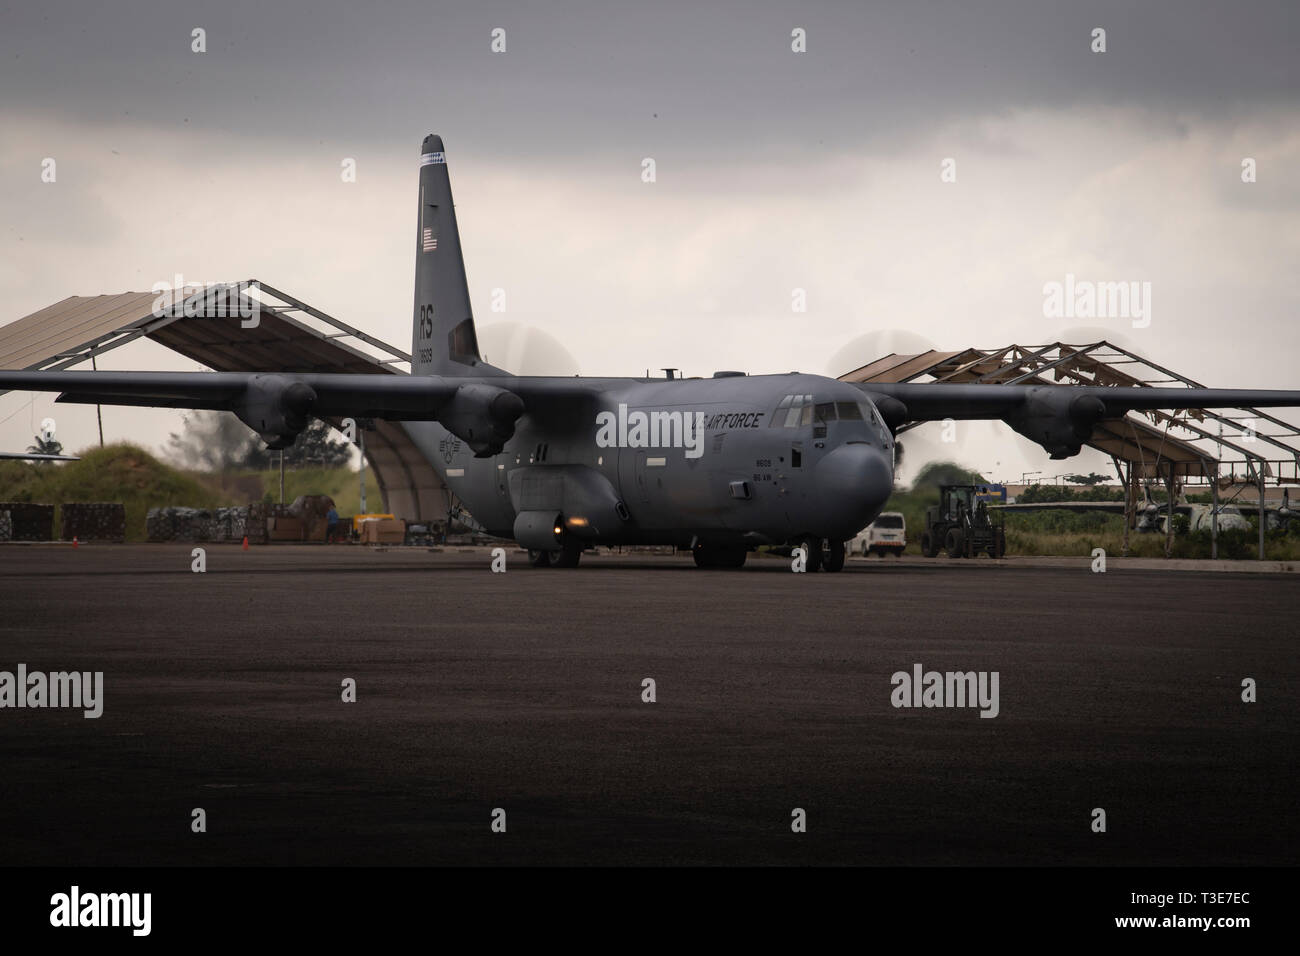 A U.S. Air Force C-130J Hercules assigned to the 75th Expeditionary Airlift Squadron, Combined Joint Task Force-Horn of Africa, taxis for takeoff at the airport in Maputo, Mozambique, April 5, 2019. The task force is helping meet requirements identified by U.S. Agency for International Development (USAID) assessment teams and humanitarian organizations working in the region by providing logistics support and manpower to USAID at the request of the Government of the Republic of Mozambique. (U.S. Air Force Photo by Tech. Sgt. Chris Hibben) Stock Photo